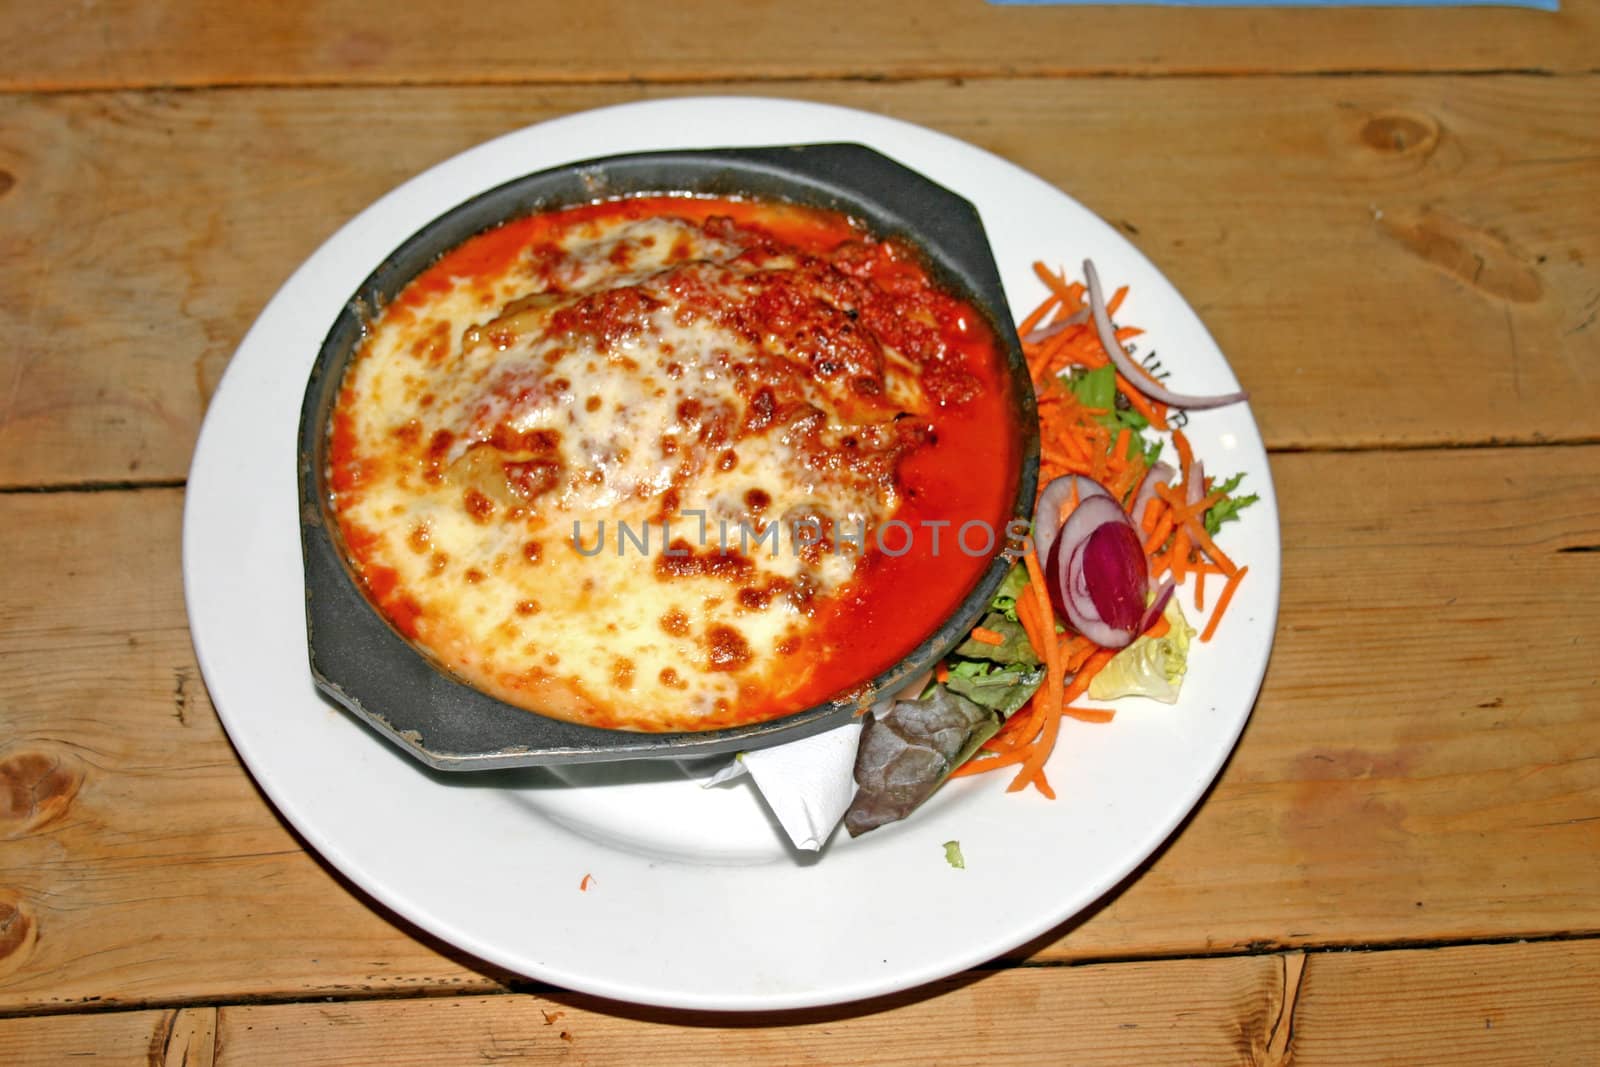 Baked Lasagne on Wooden Table